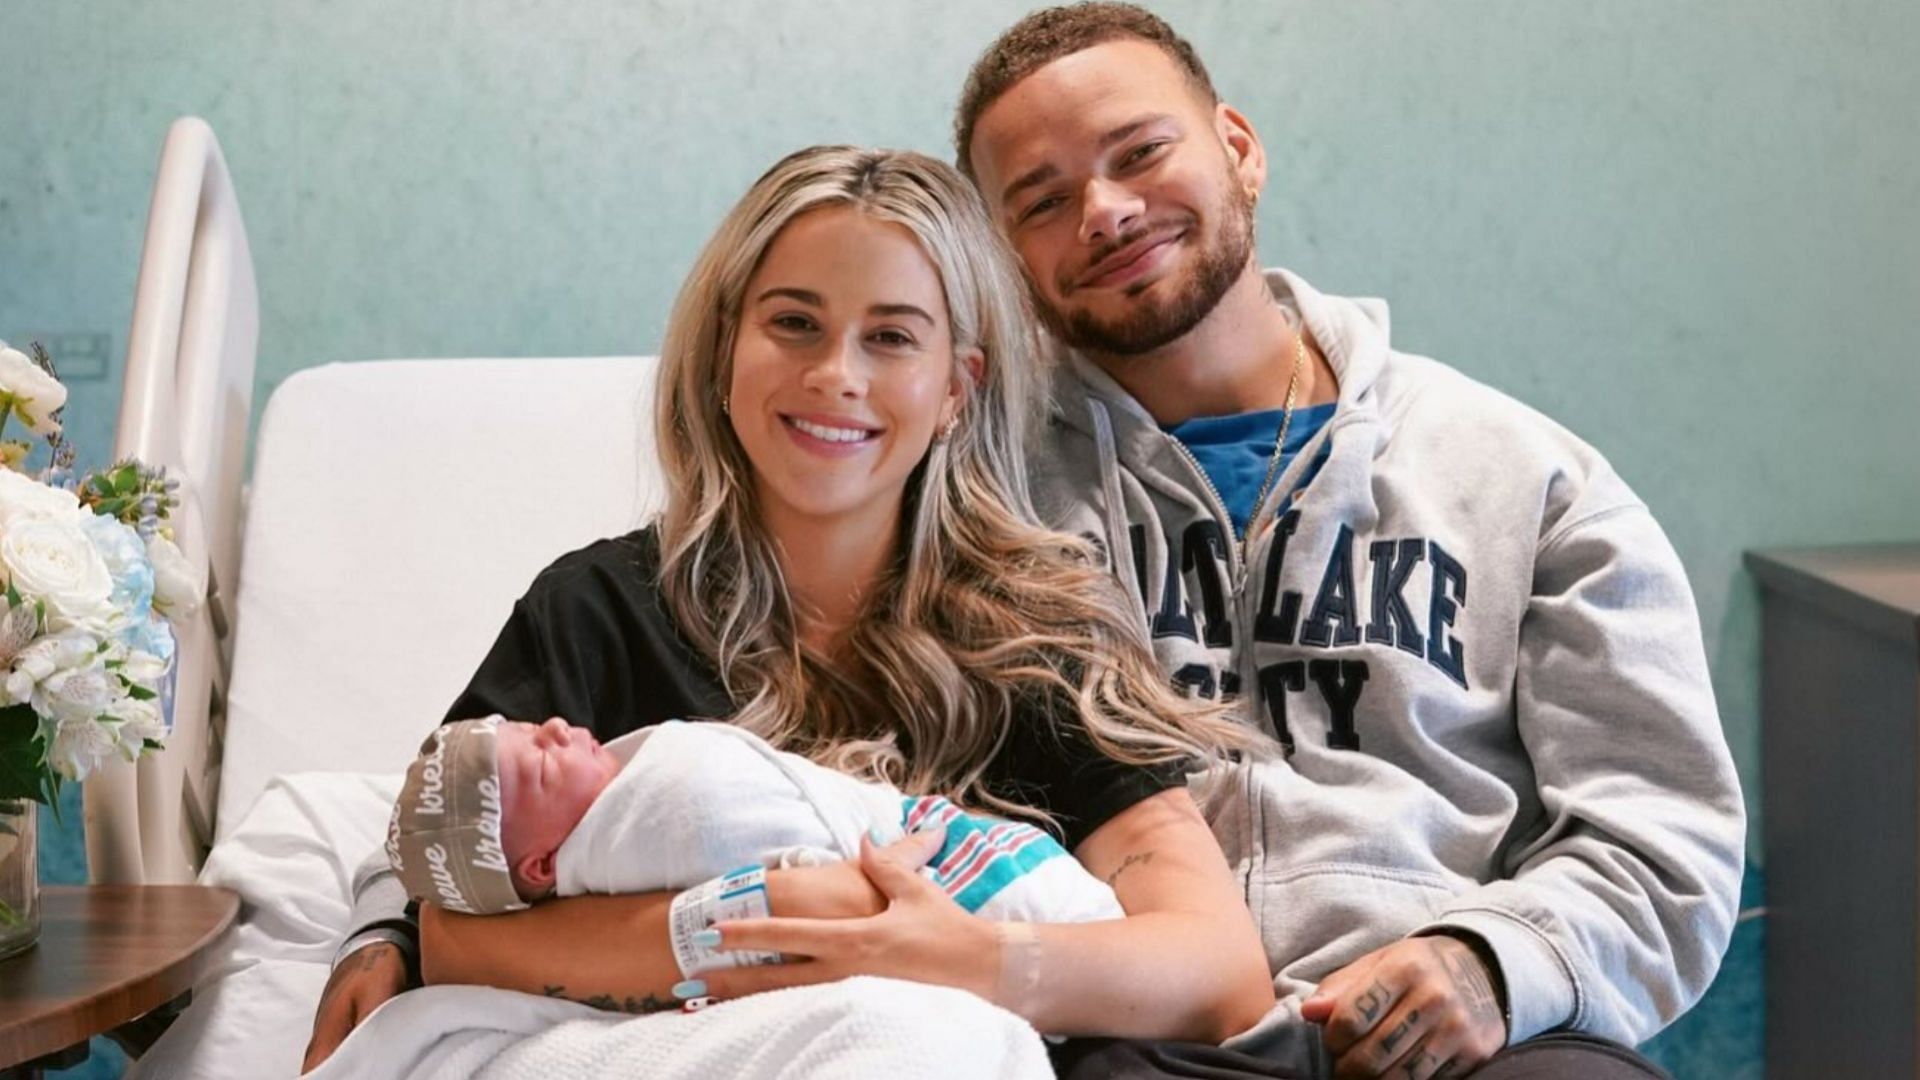 Kane and Katelyn Brown welcomed a new baby boy (Image via Instagram/@katelynbrown)